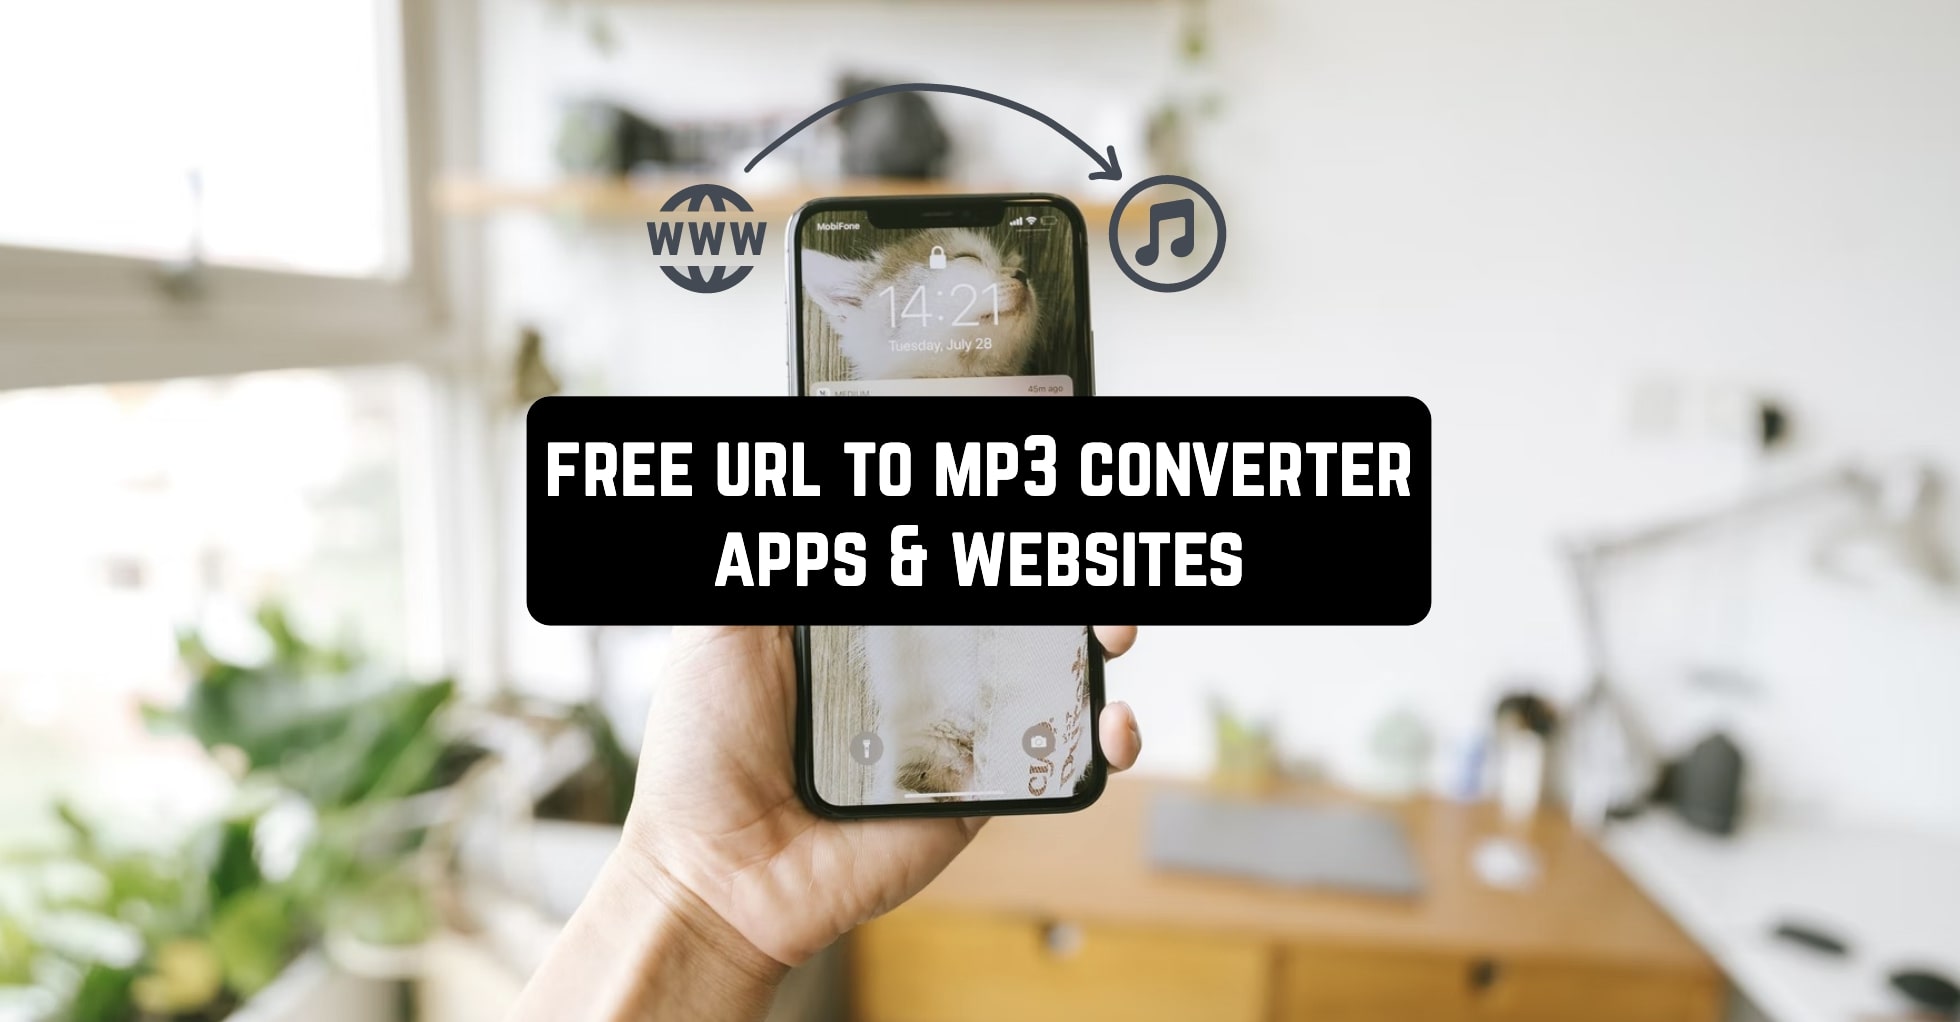 Free-URL-To-MP3-Converter-Apps-Websites